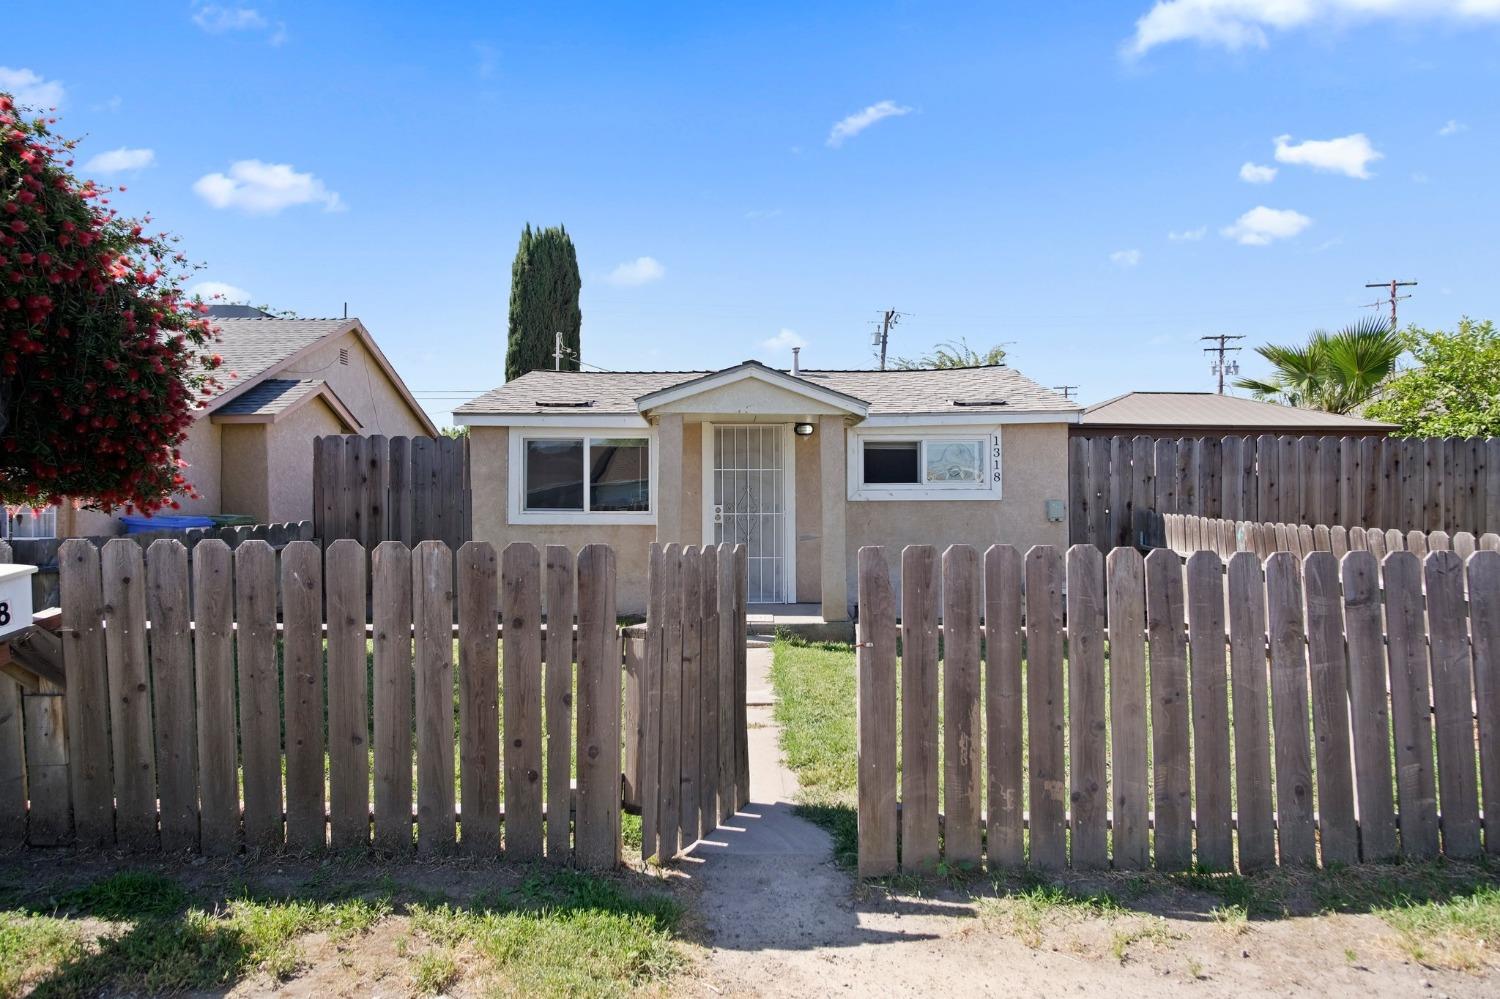 Photo of 1318 Holm Ave in Modesto, CA